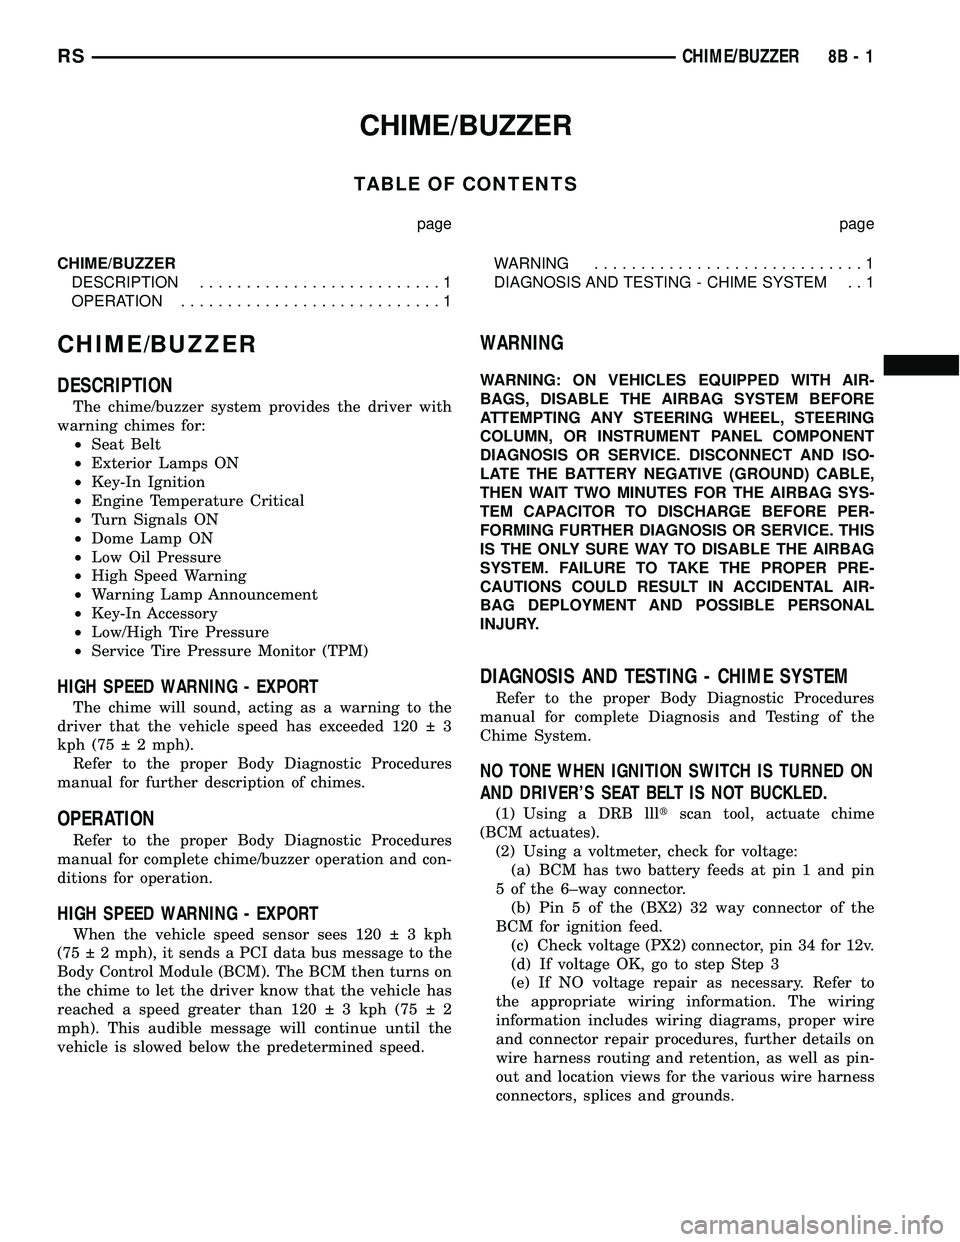 DODGE TOWN AND COUNTRY 2004  Service Manual CHIME/BUZZER
TABLE OF CONTENTS
page page
CHIME/BUZZER
DESCRIPTION..........................1
OPERATION............................1WARNING.............................1
DIAGNOSIS AND TESTING - CHIME S